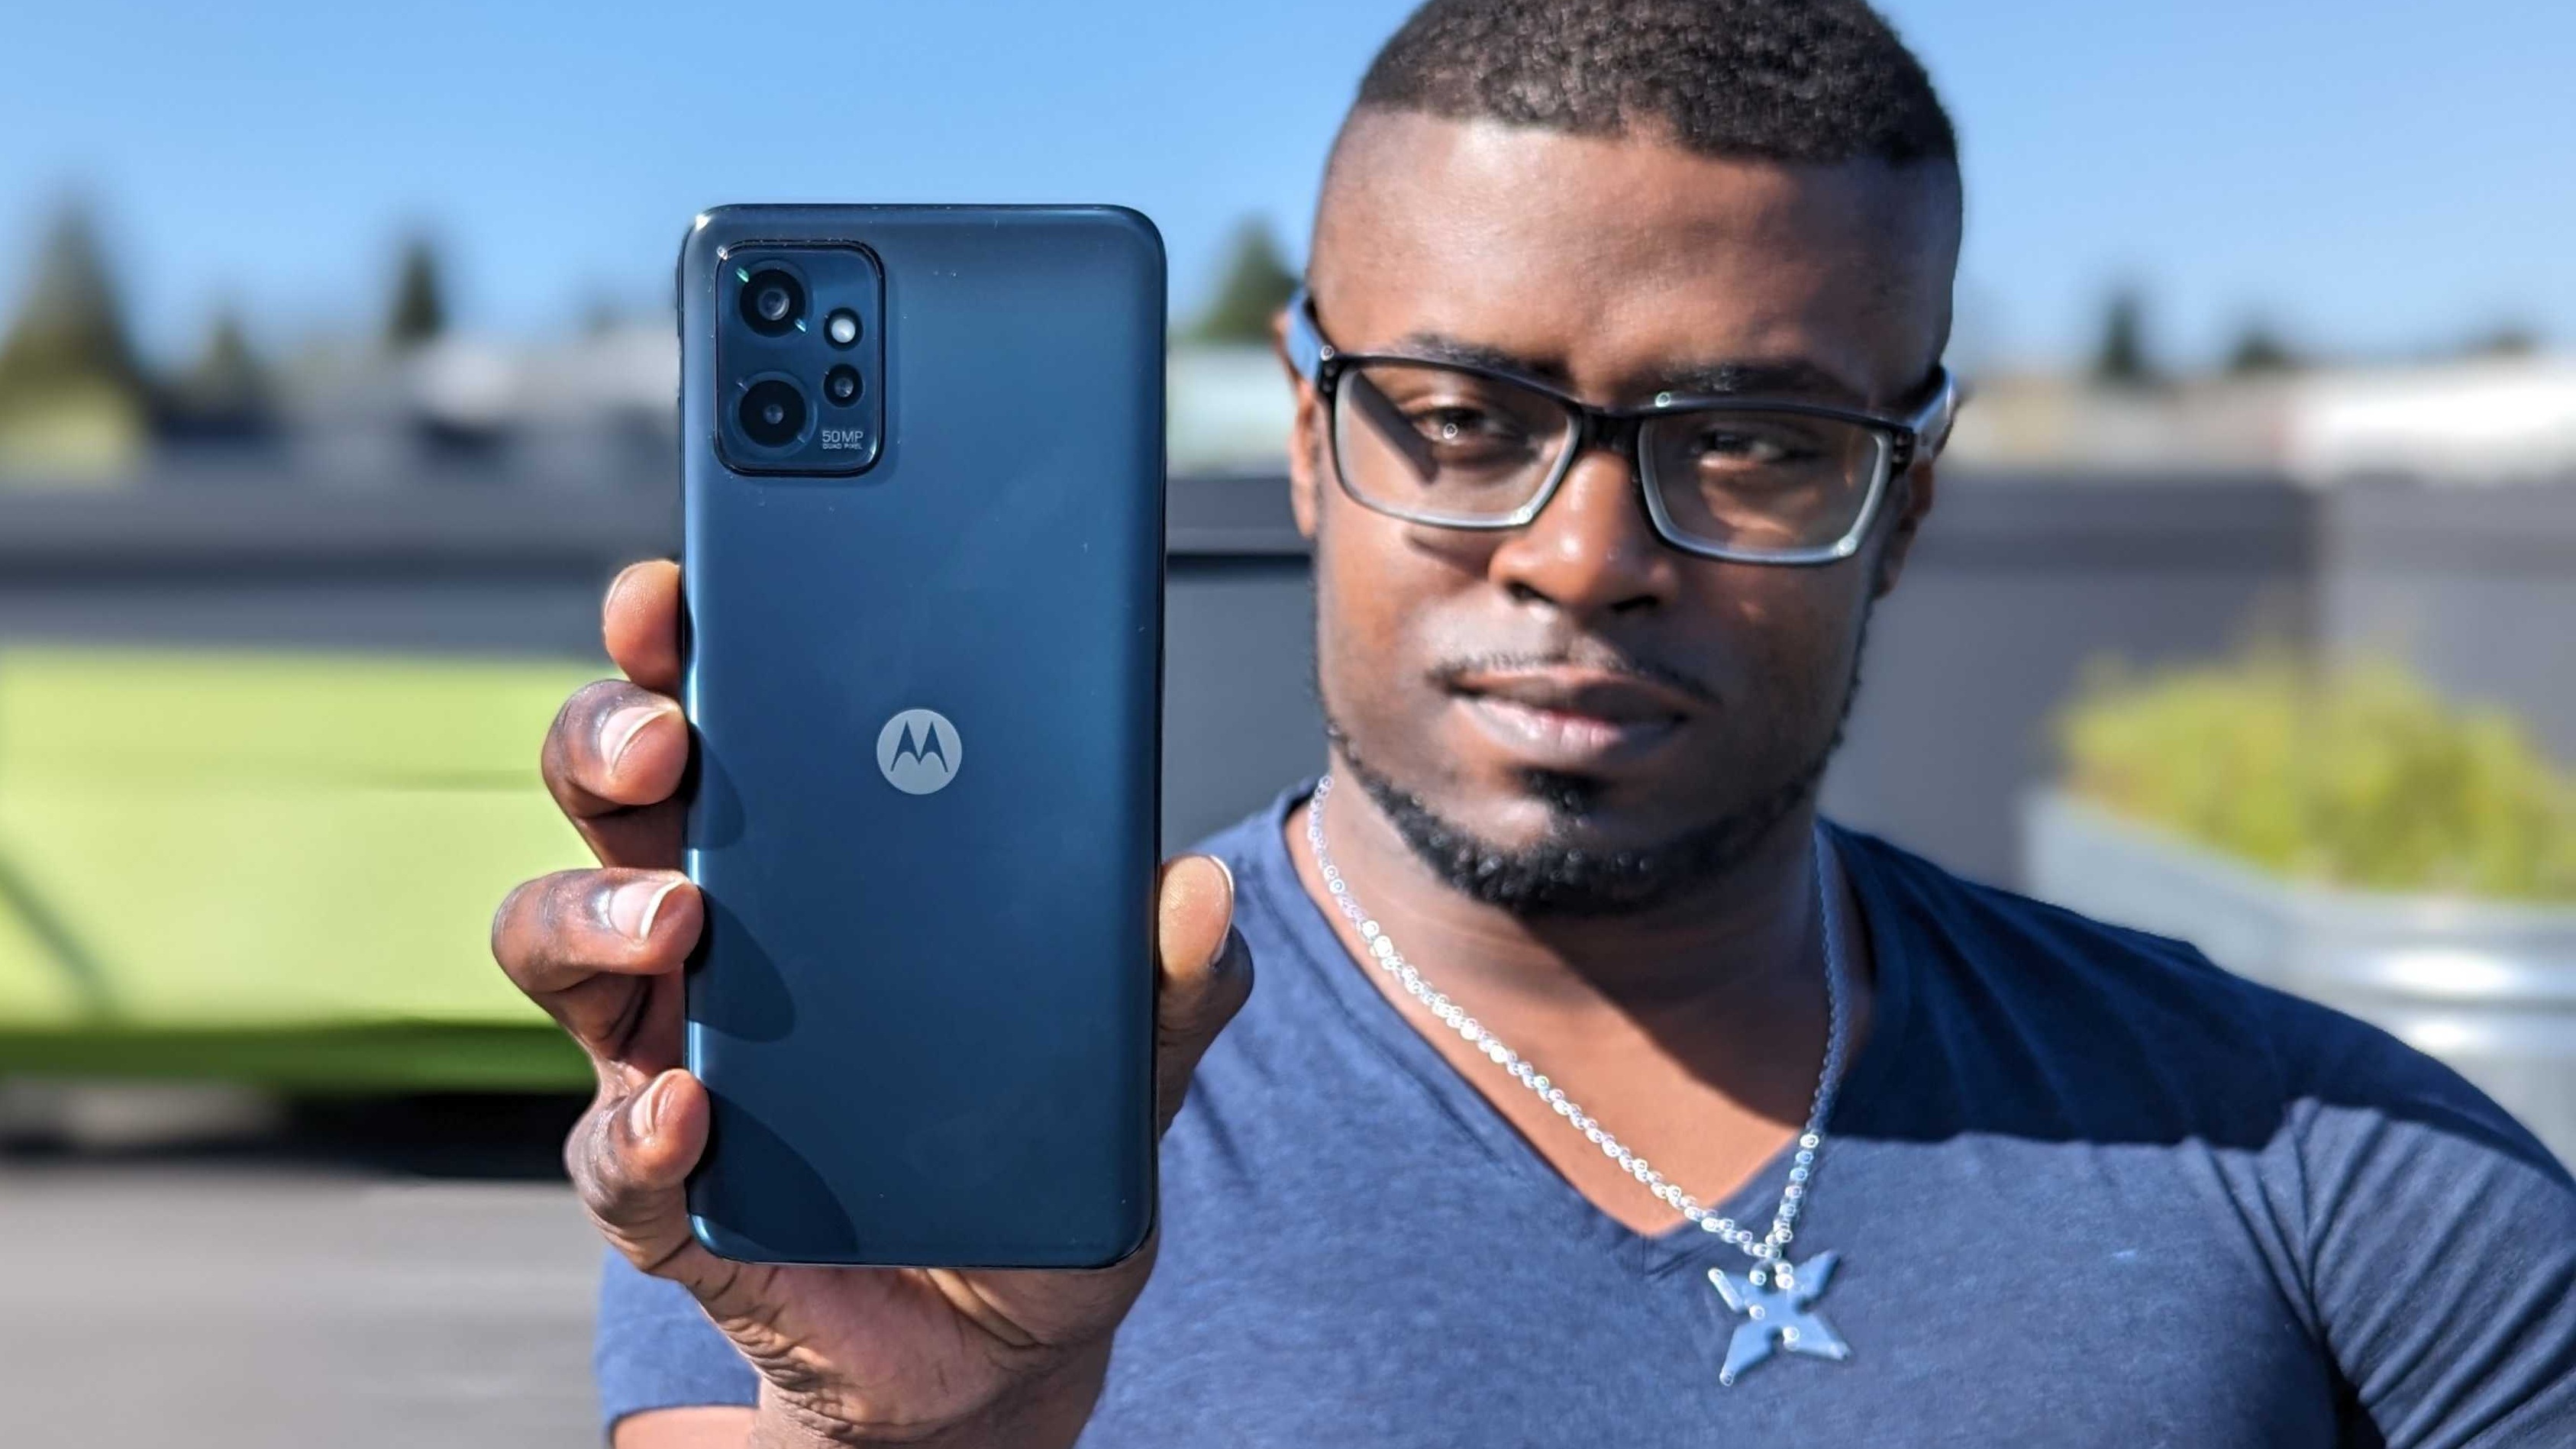 Motorola Moto G8 Plus smartphone review – Mobile phone with action